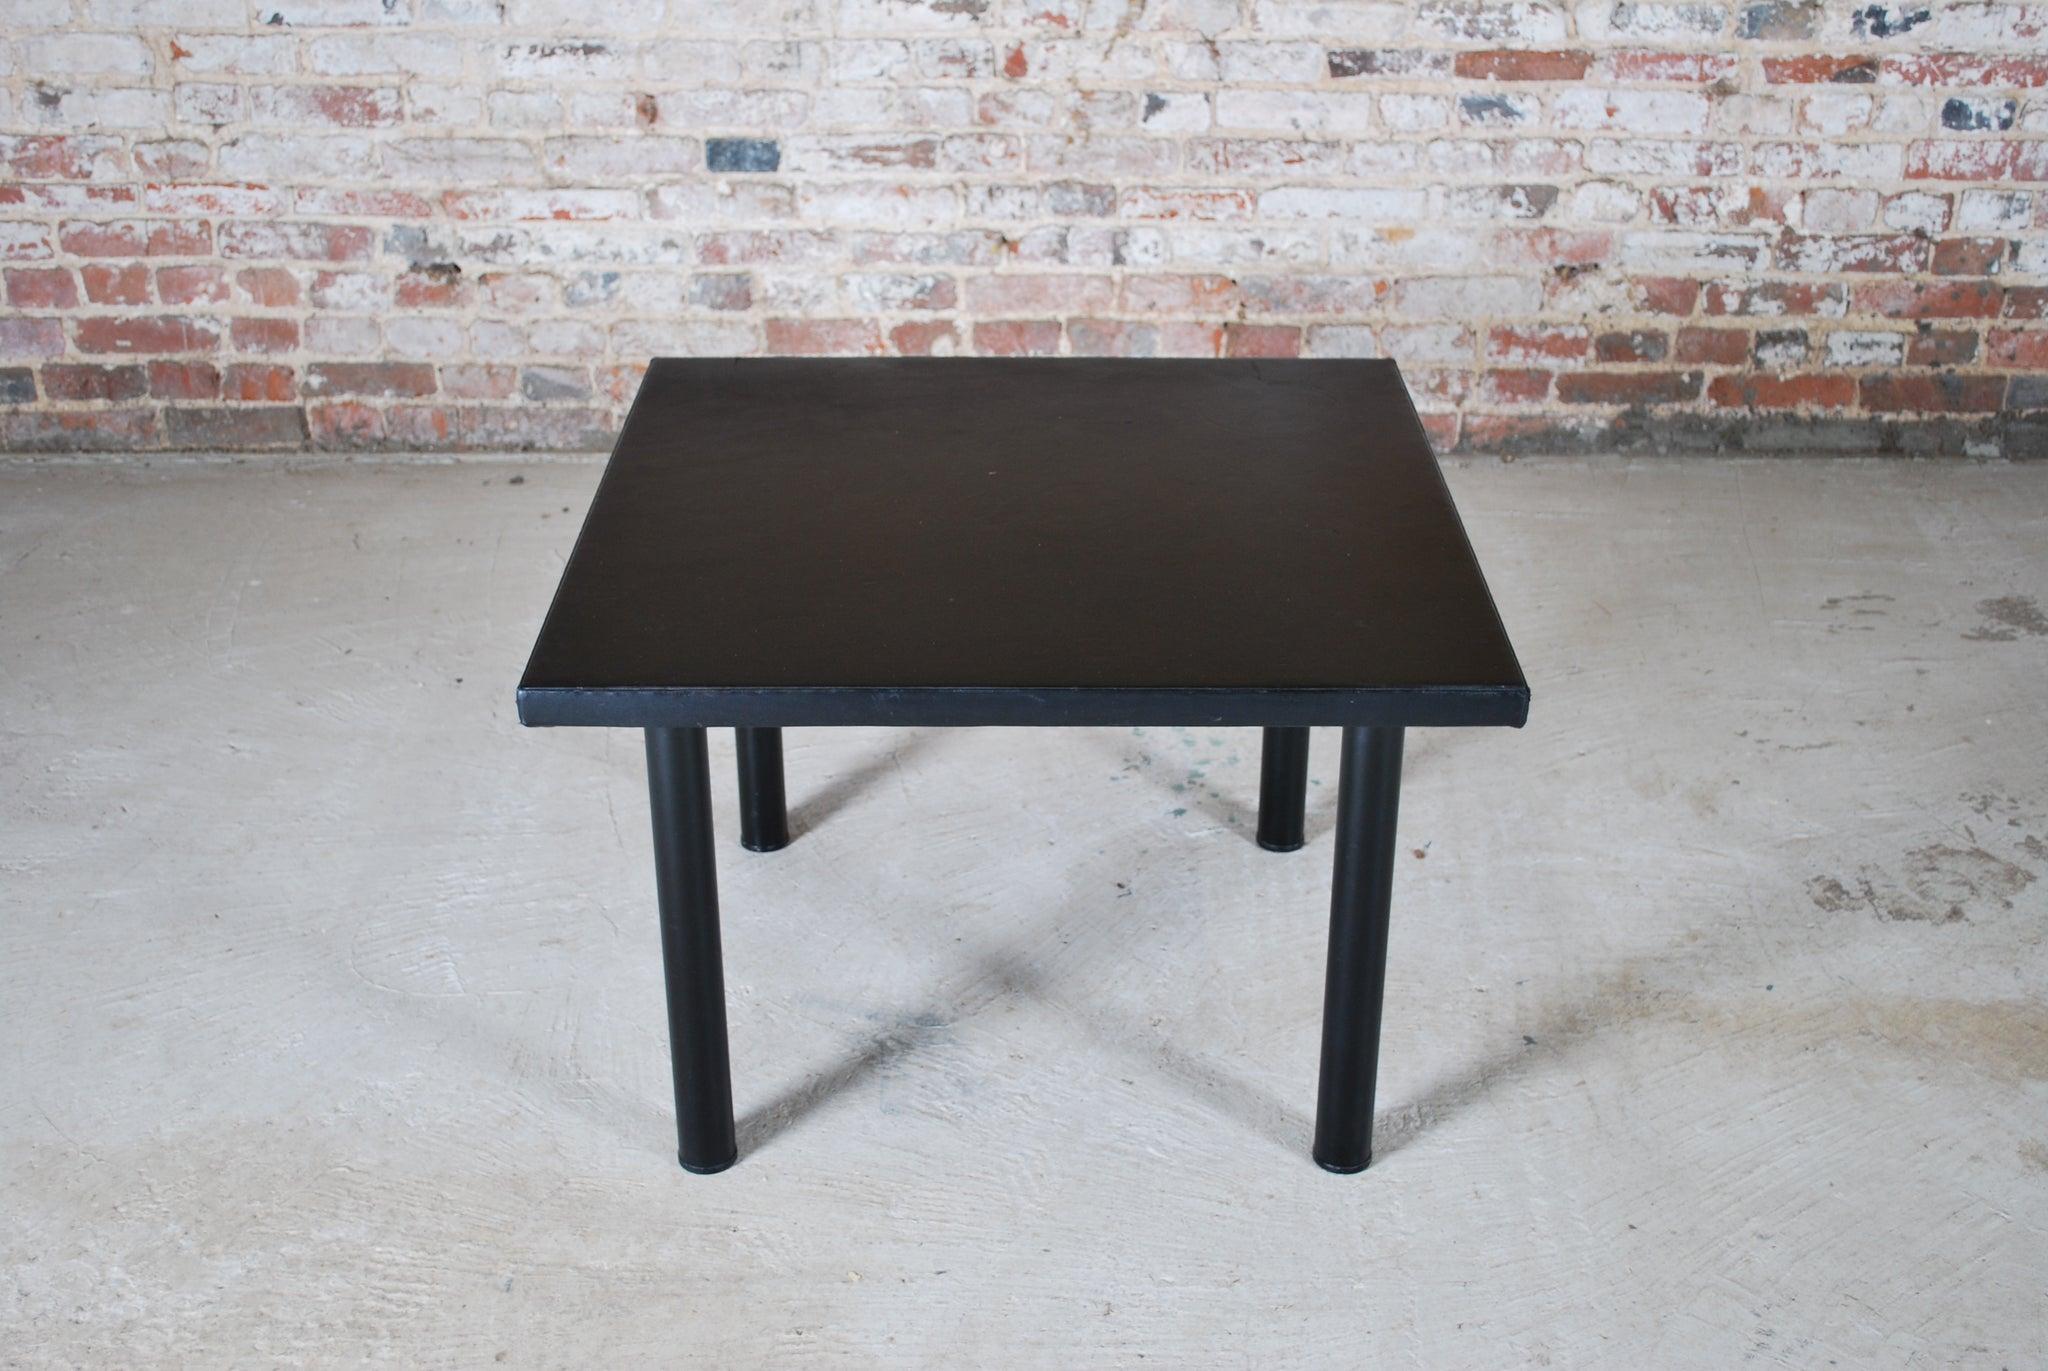 Mid-century coffee table with leather top and aluminium legs. Designed by Yrjö Kukkapuro for Haimi, 1960s. Good vintage condition.

Dimension: W 76 cm x D 76 cm x H 51 cm.